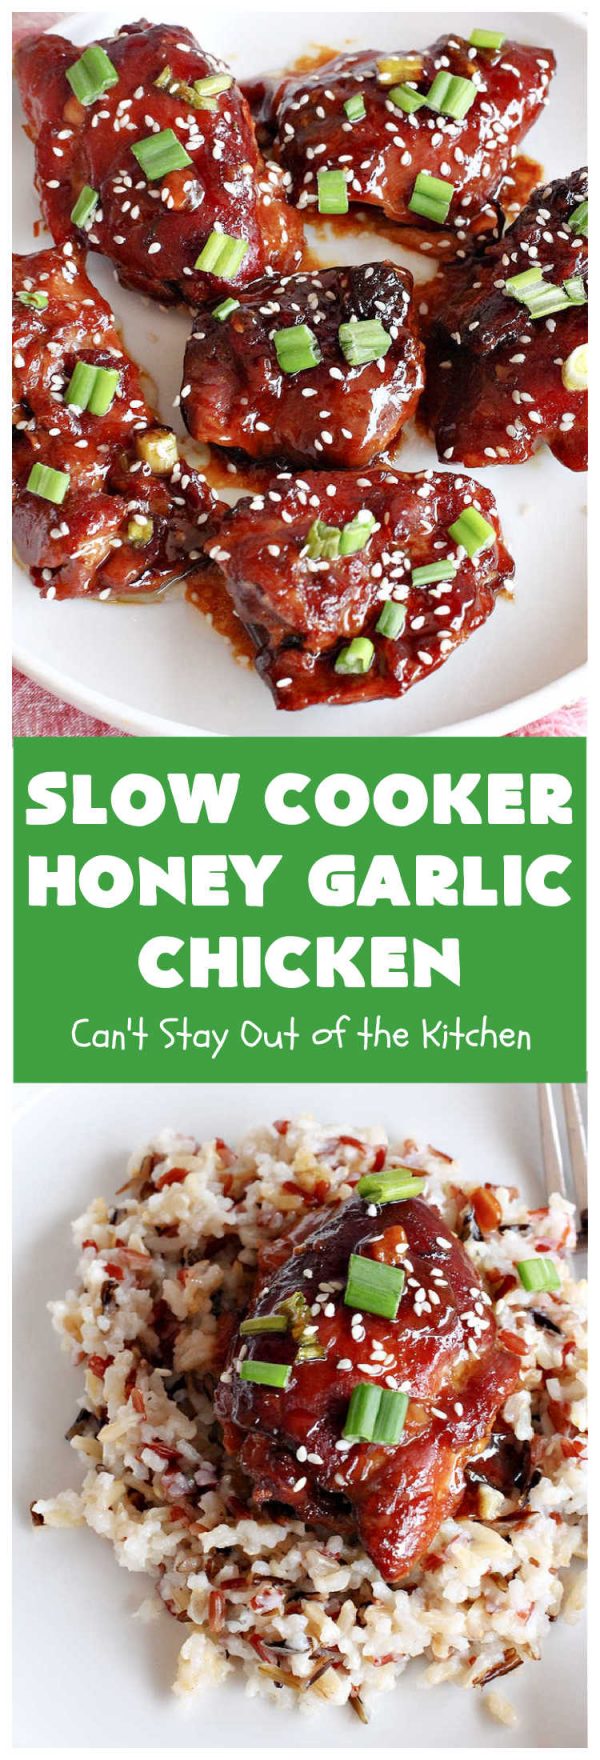 Slow Cooker Honey Garlic Chicken – Can't Stay Out of the Kitchen